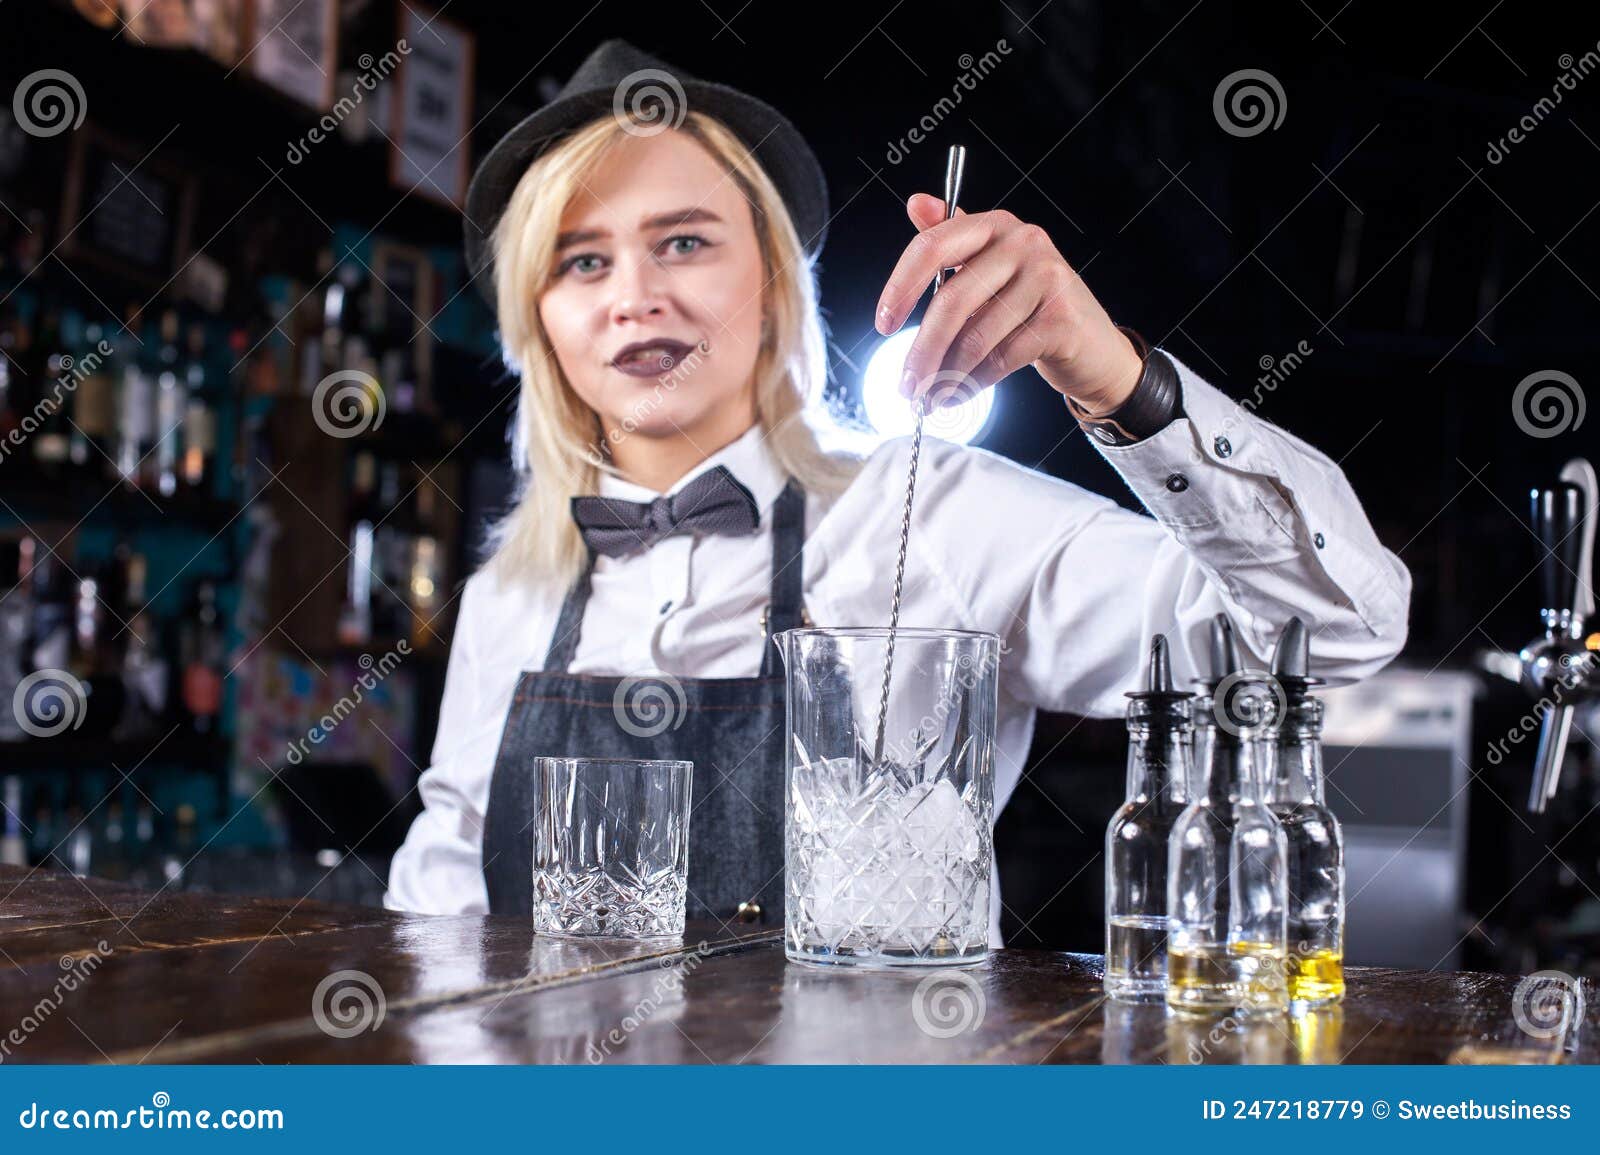 Portrait of Woman Bartending Adds Ingredients To a Cocktail while ...